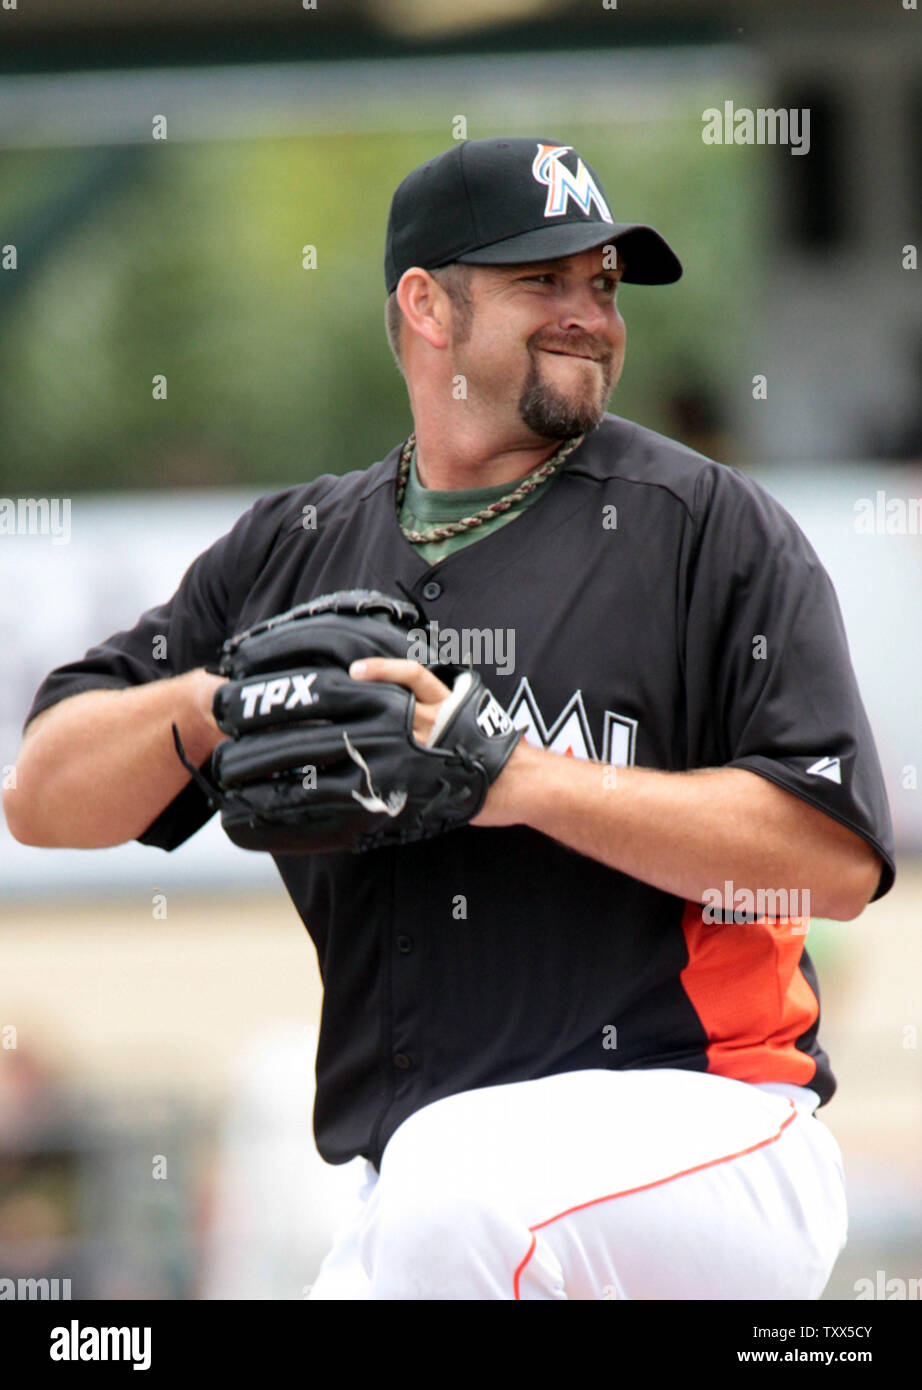 Miami Marlins pitcher Heath Bell throws to the New York Mets at the Roger  Dean Stadium in Jupiter, Florida on March 15, 2012. The Miami Marlins beat  the New York Mets 3-1.